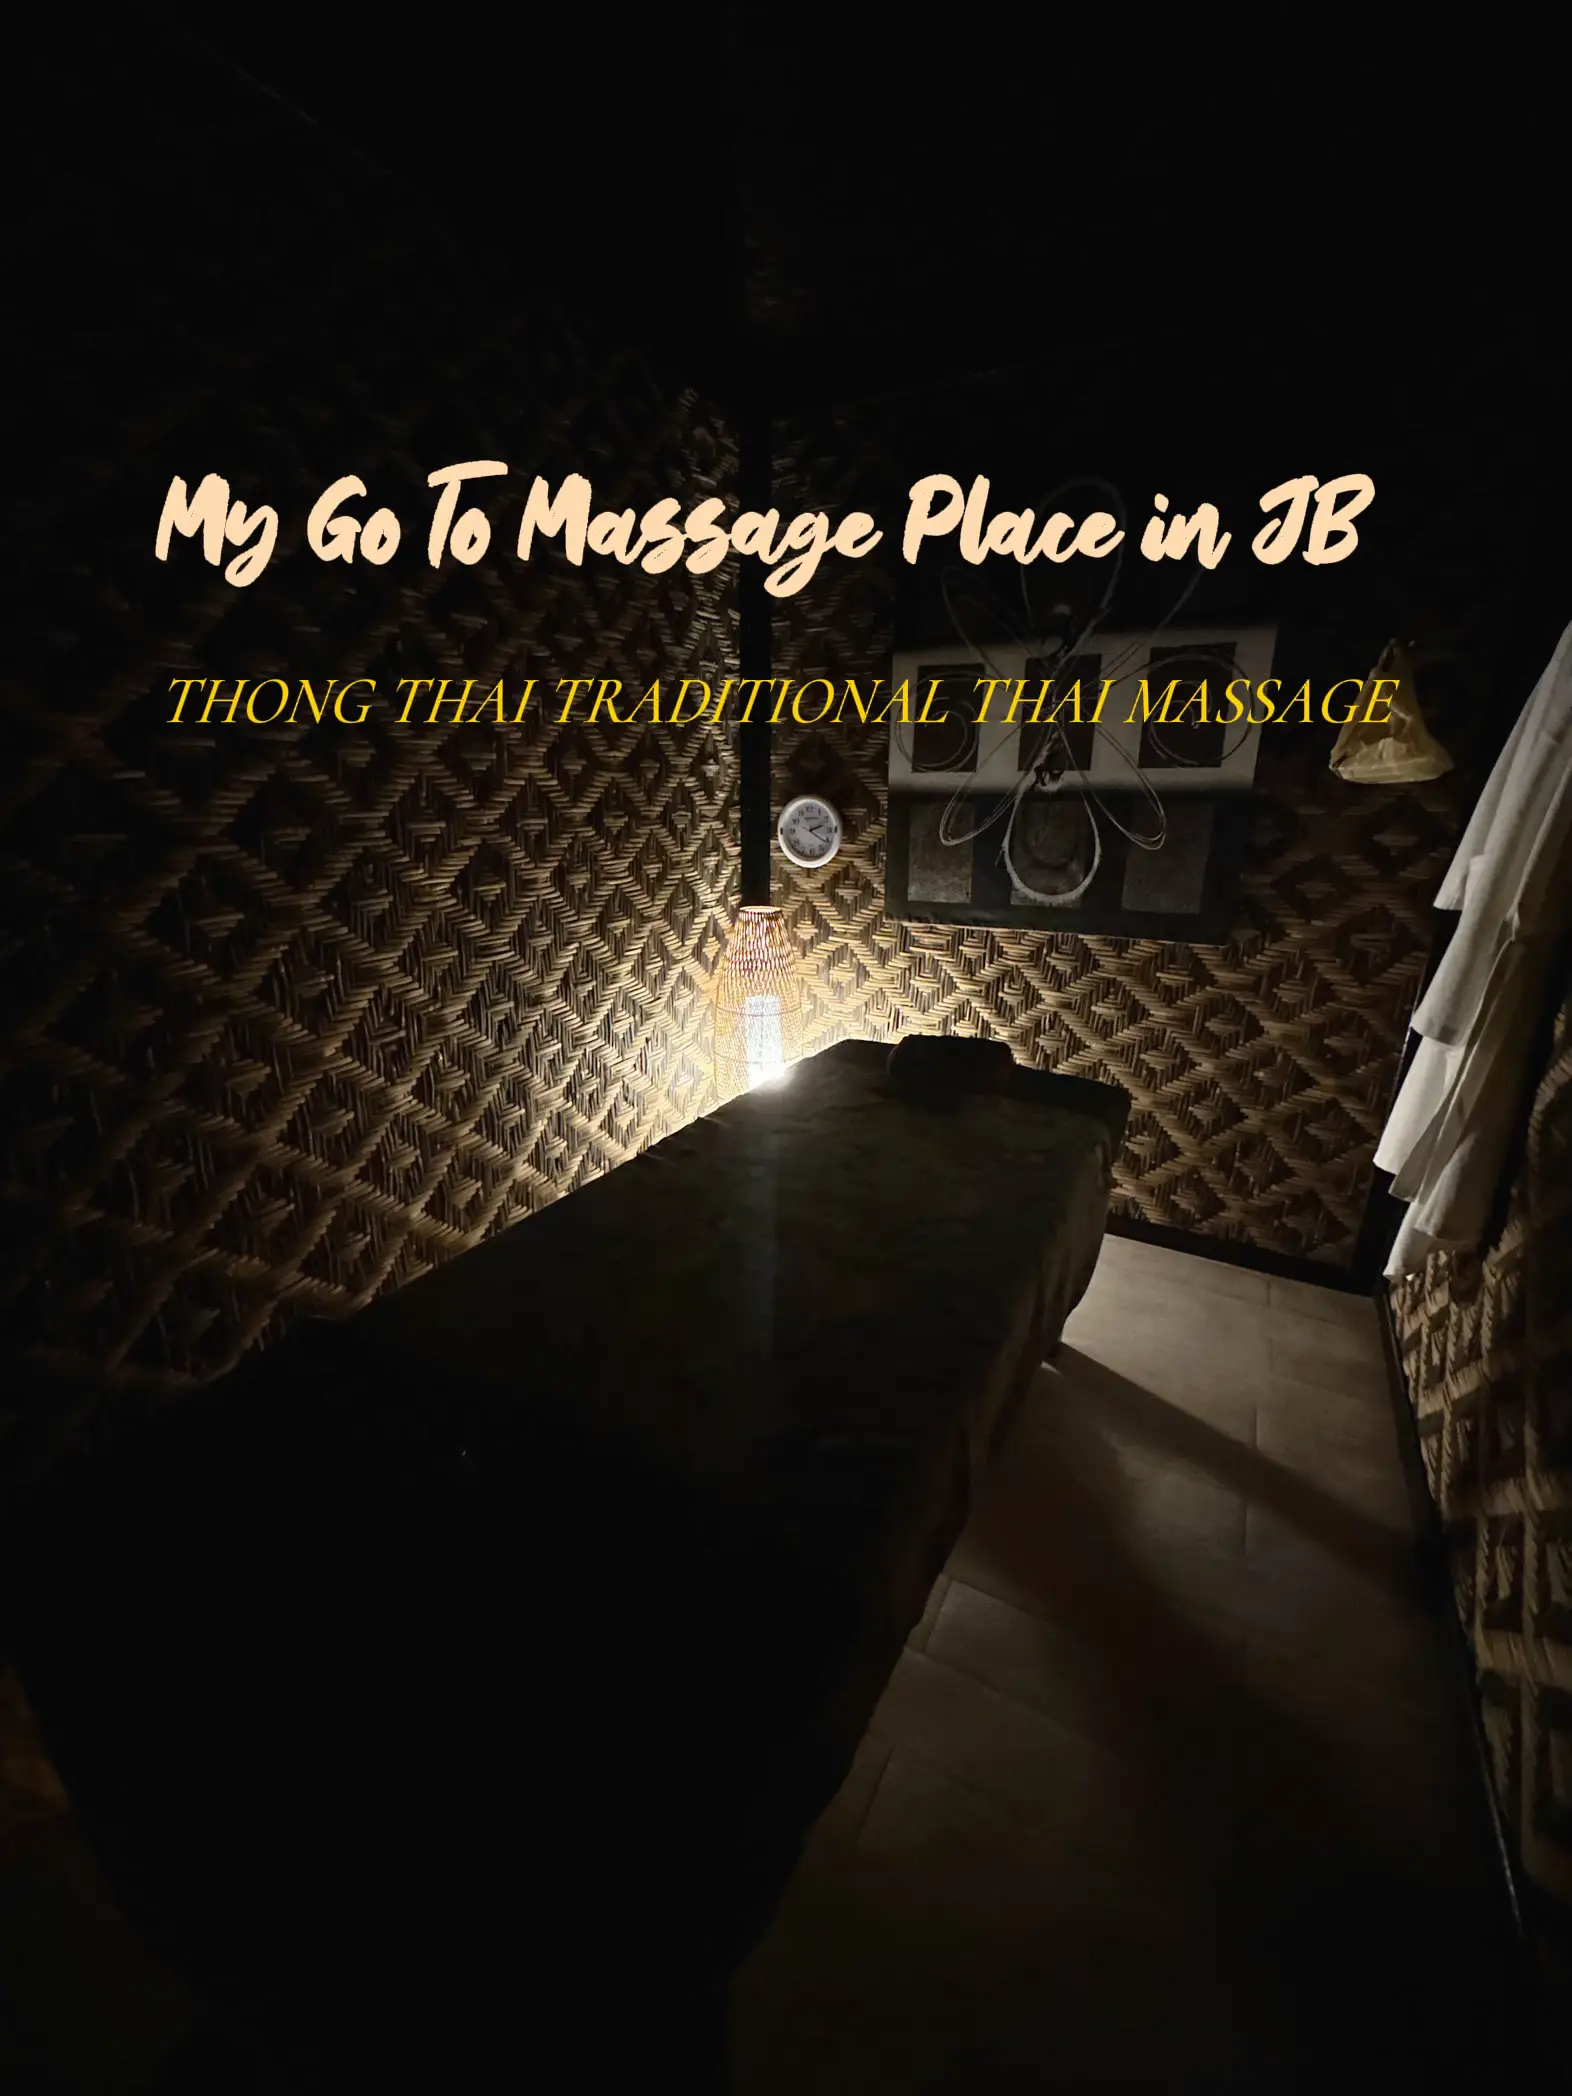 My Go To Massage Place in JB's images